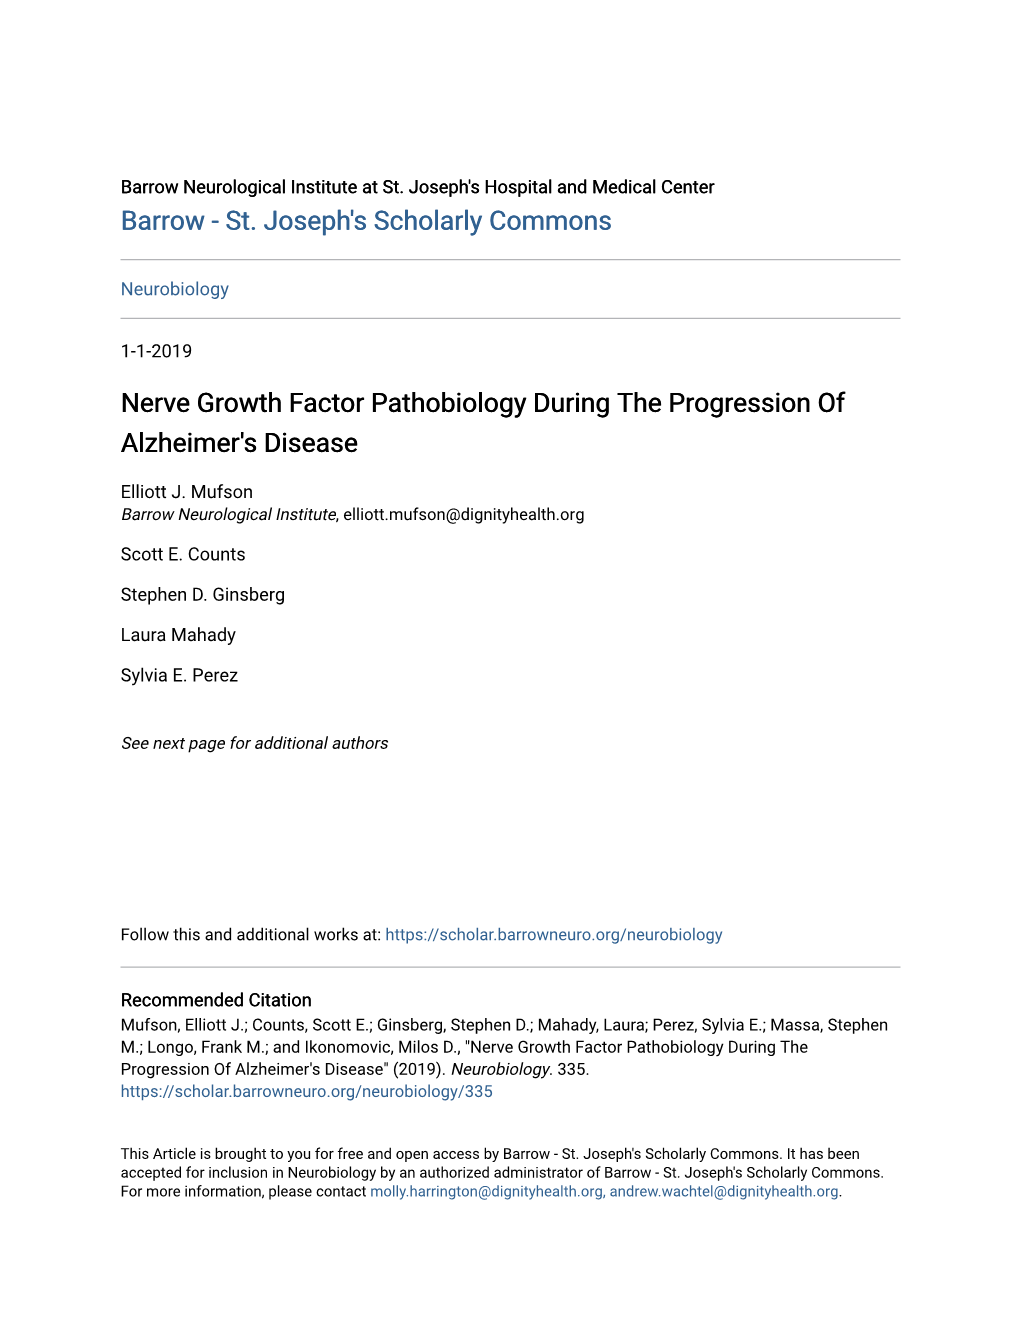 Nerve Growth Factor Pathobiology During the Progression of Alzheimer's Disease